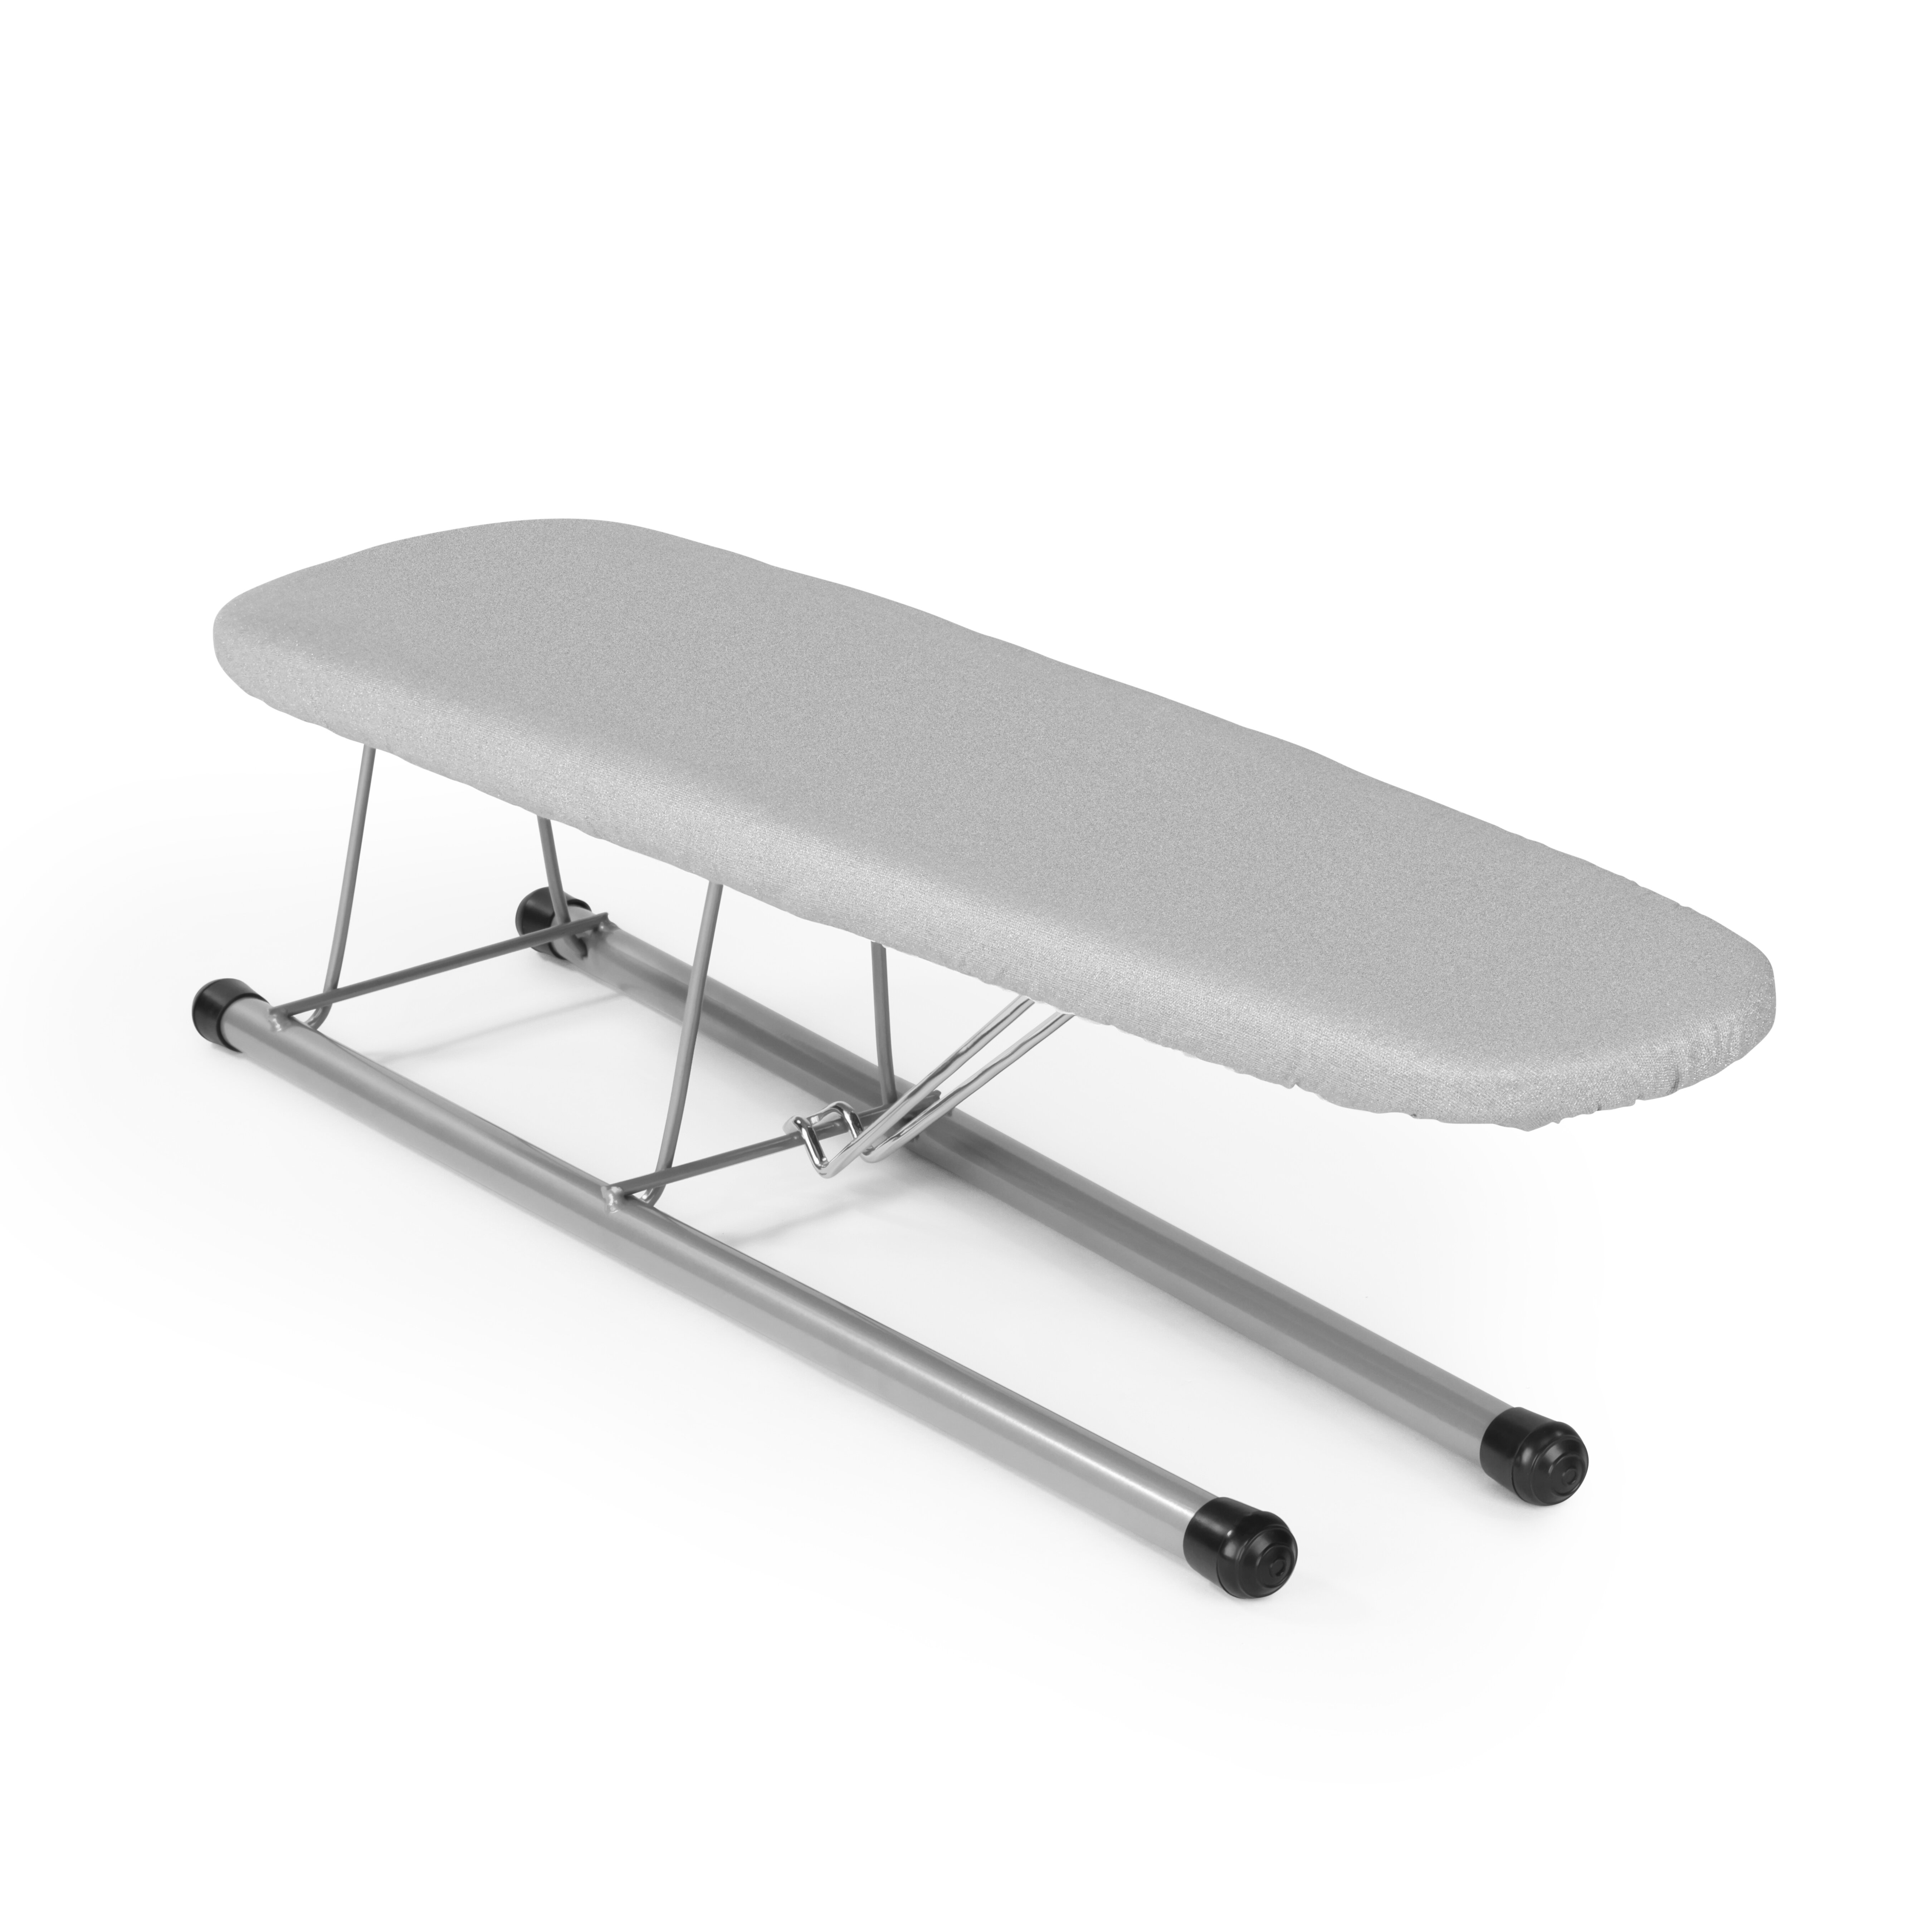 Foldable Table Top Ironing Board With Cover For Small Spaces Portable Fold-able